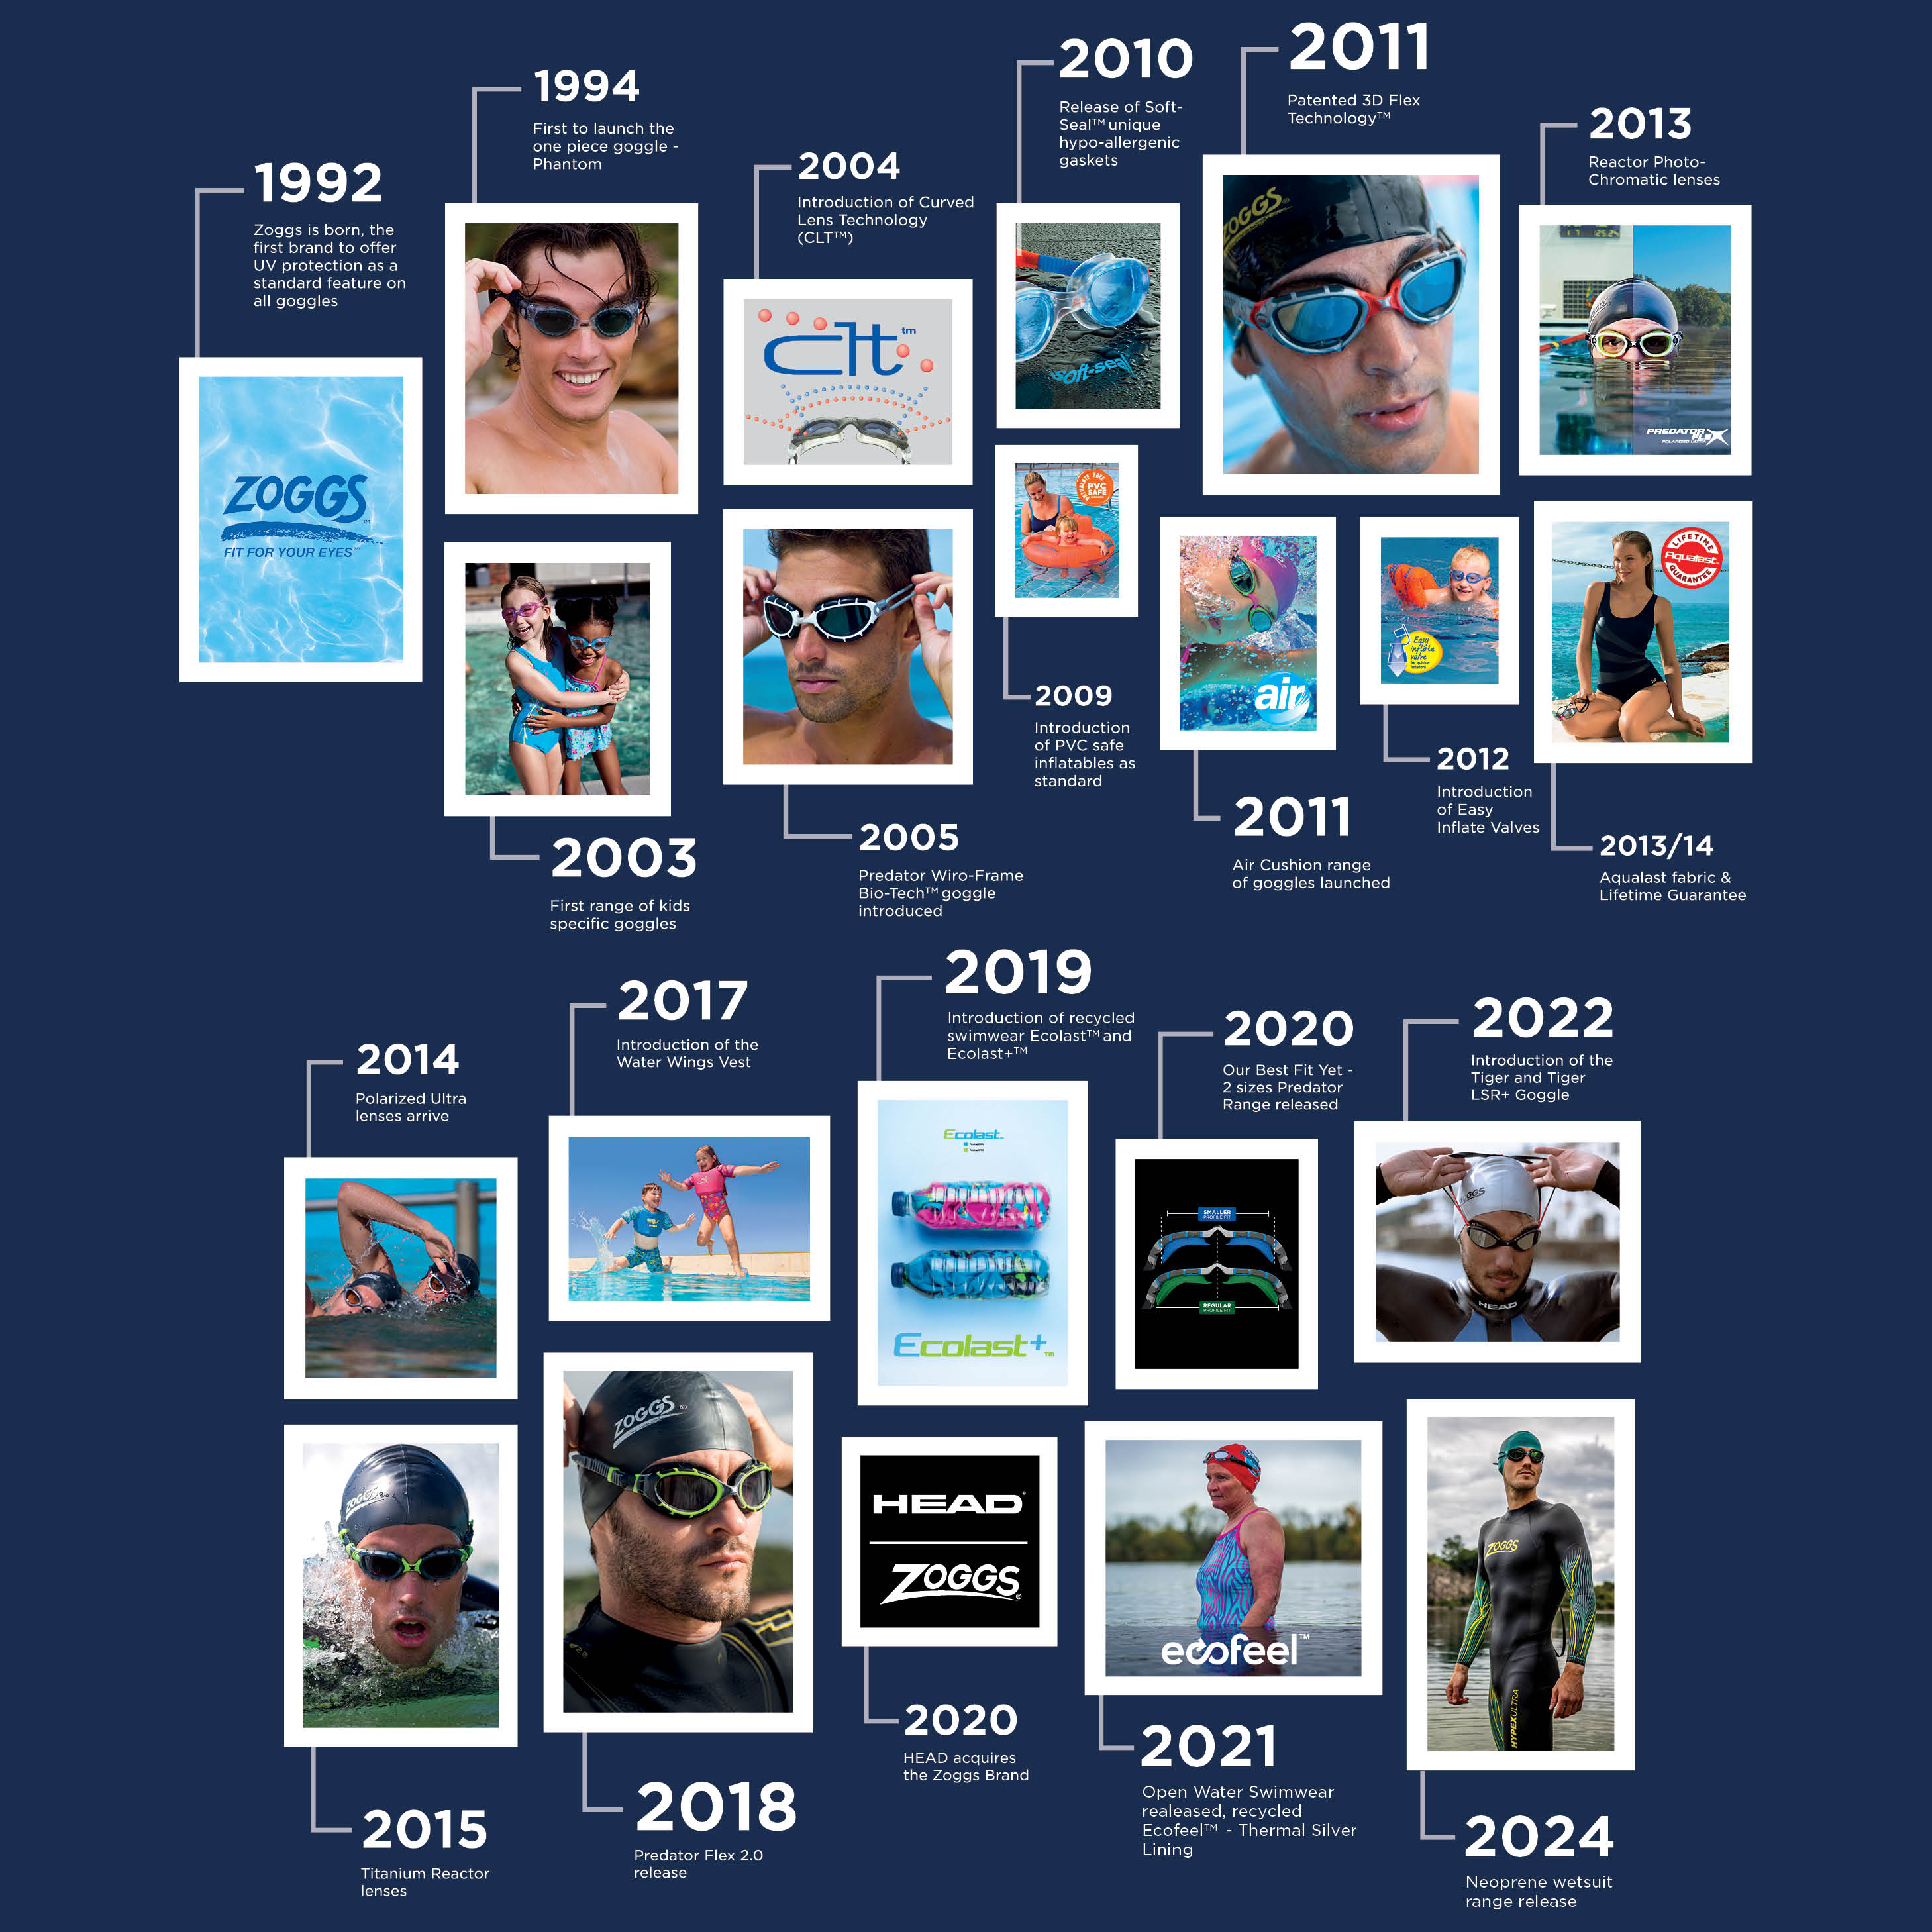 Zoggs timeline of product evolution